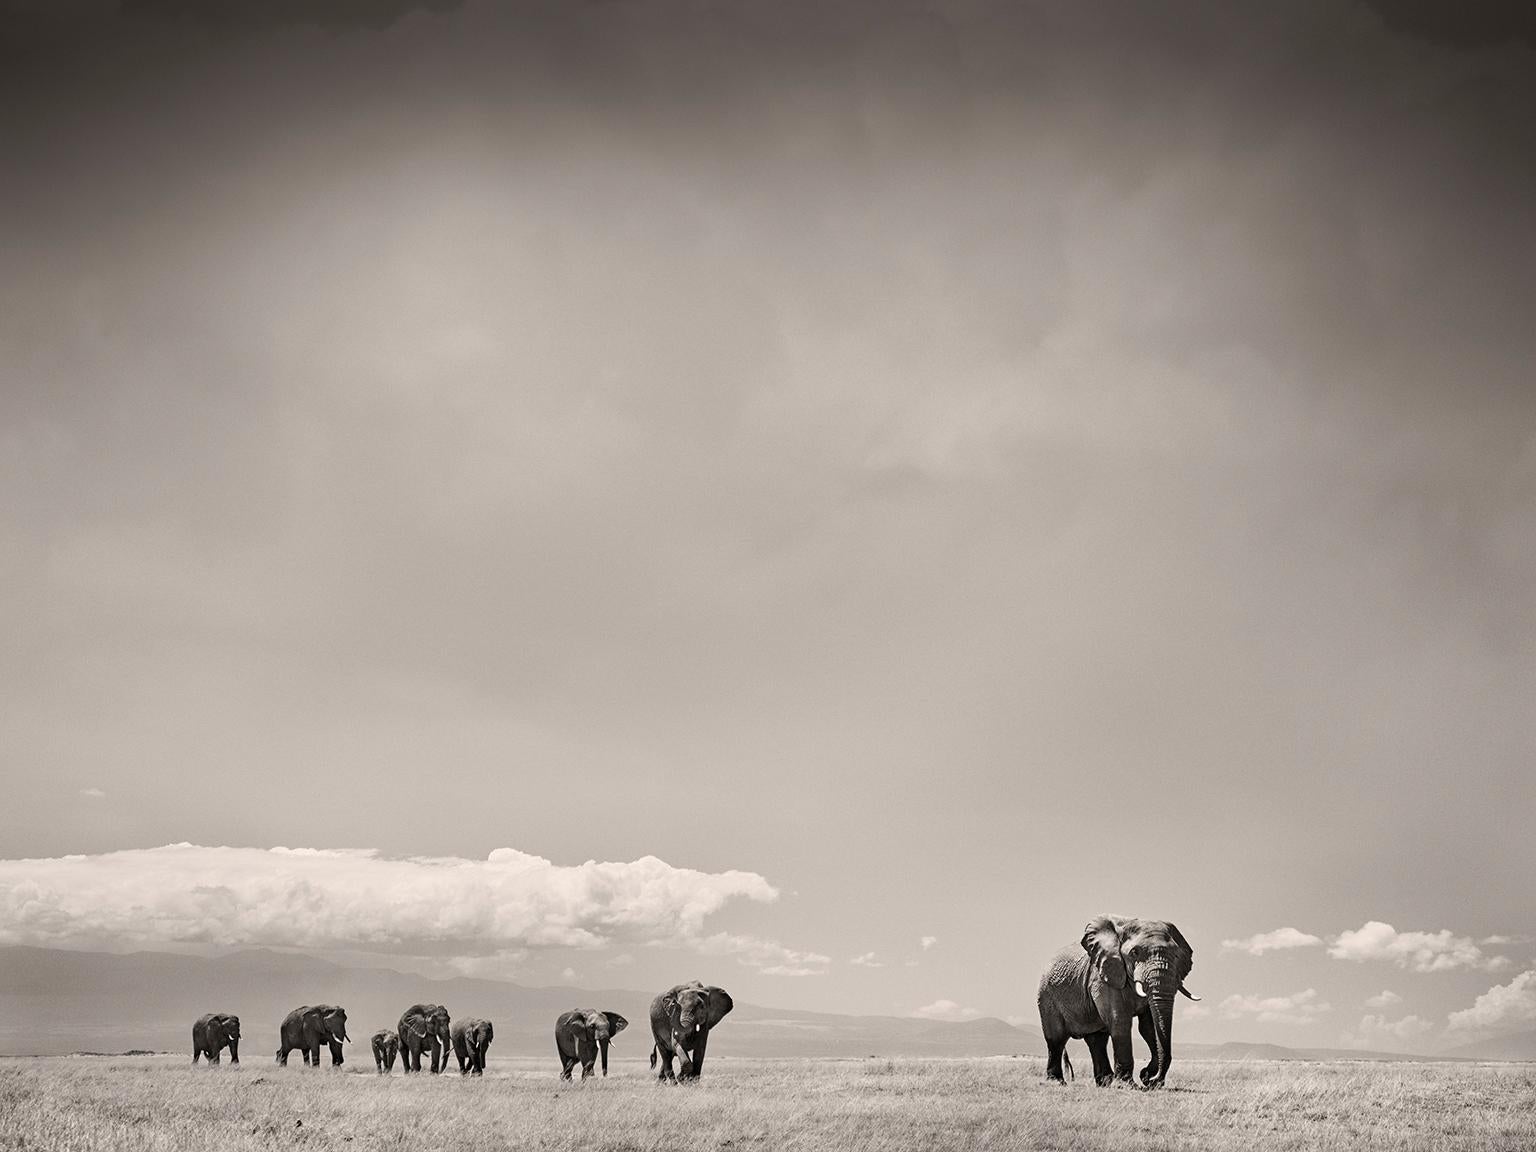 Joachim Schmeisser Black and White Photograph - The Matriarch, animal, wildlife, black and white photography, elephant